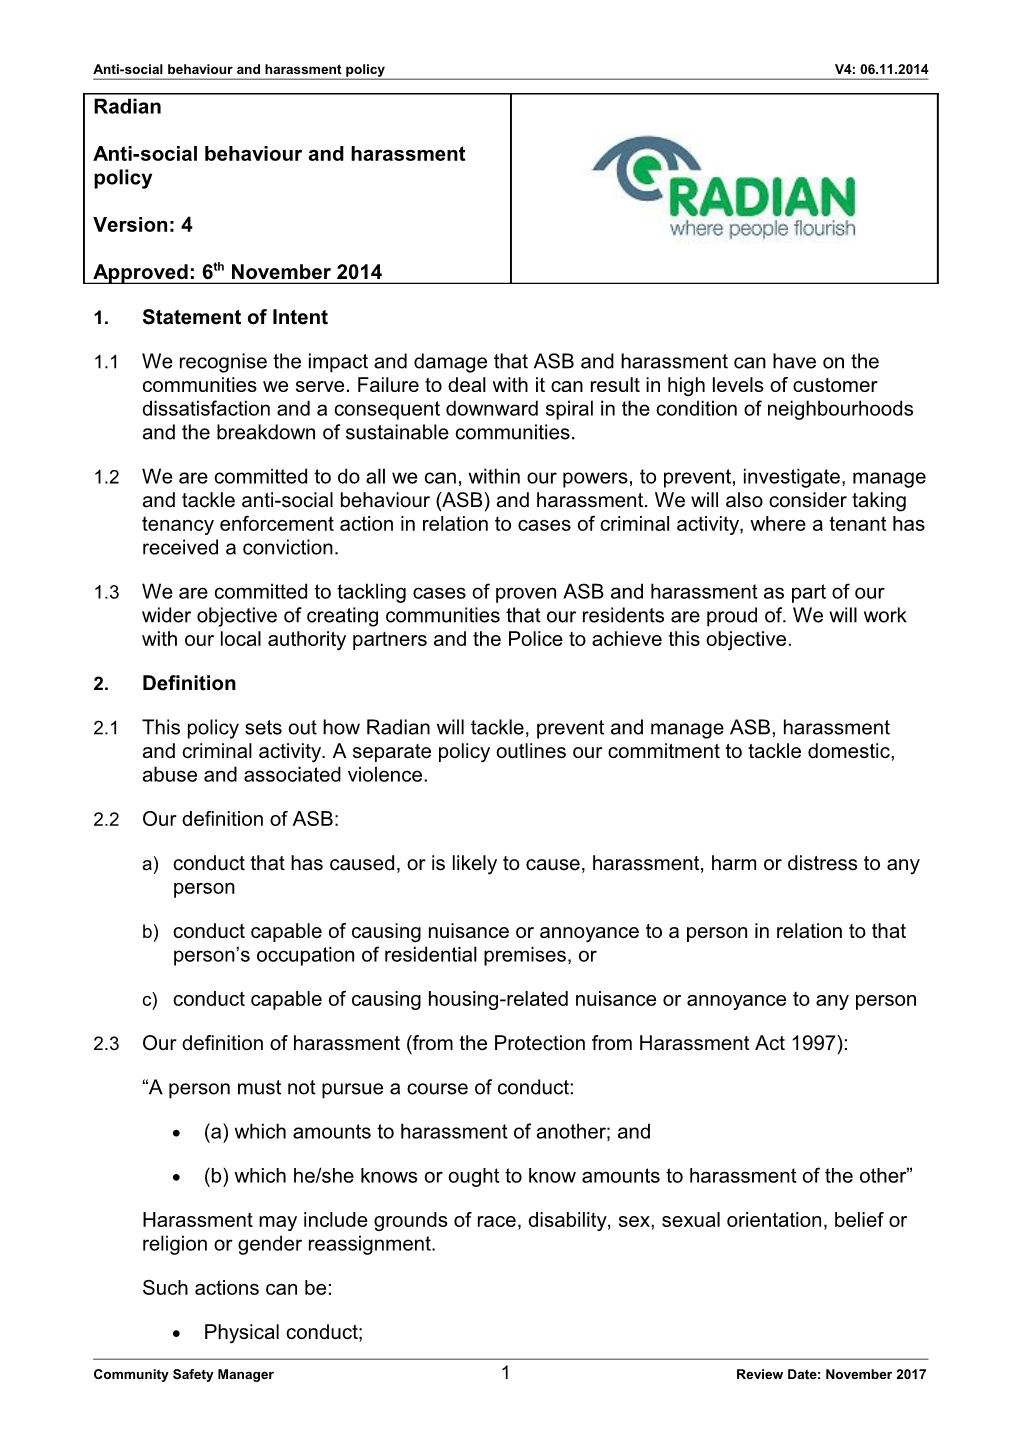 Anti-Social Behaviour and Harassment Policy